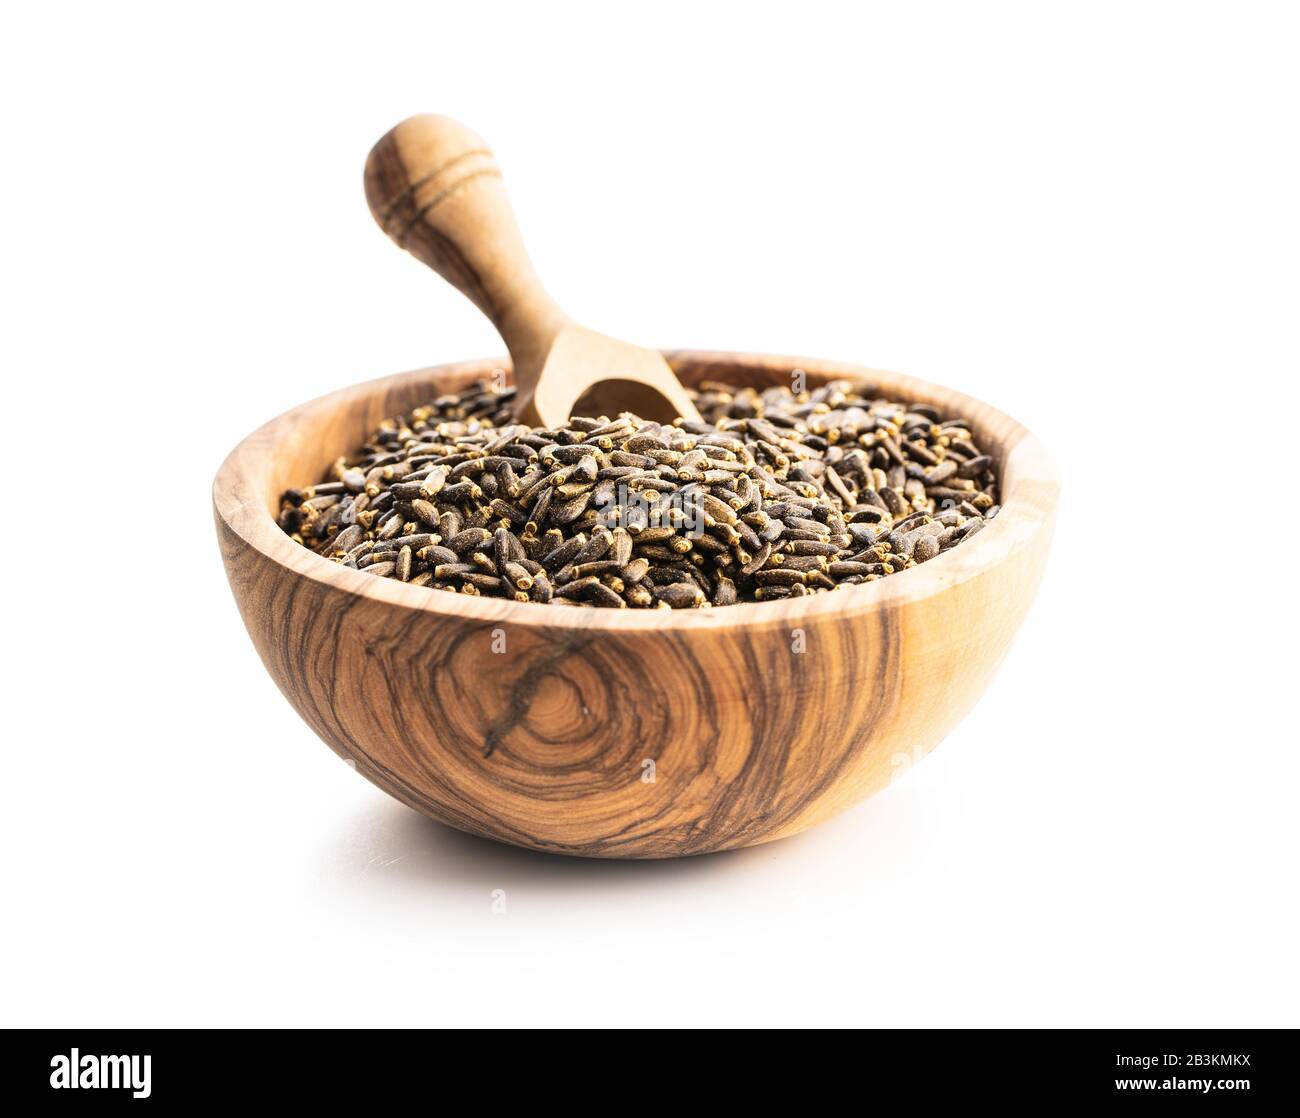 Milk thistle seeds in wooden bowl isolated on white background. Stock Photo